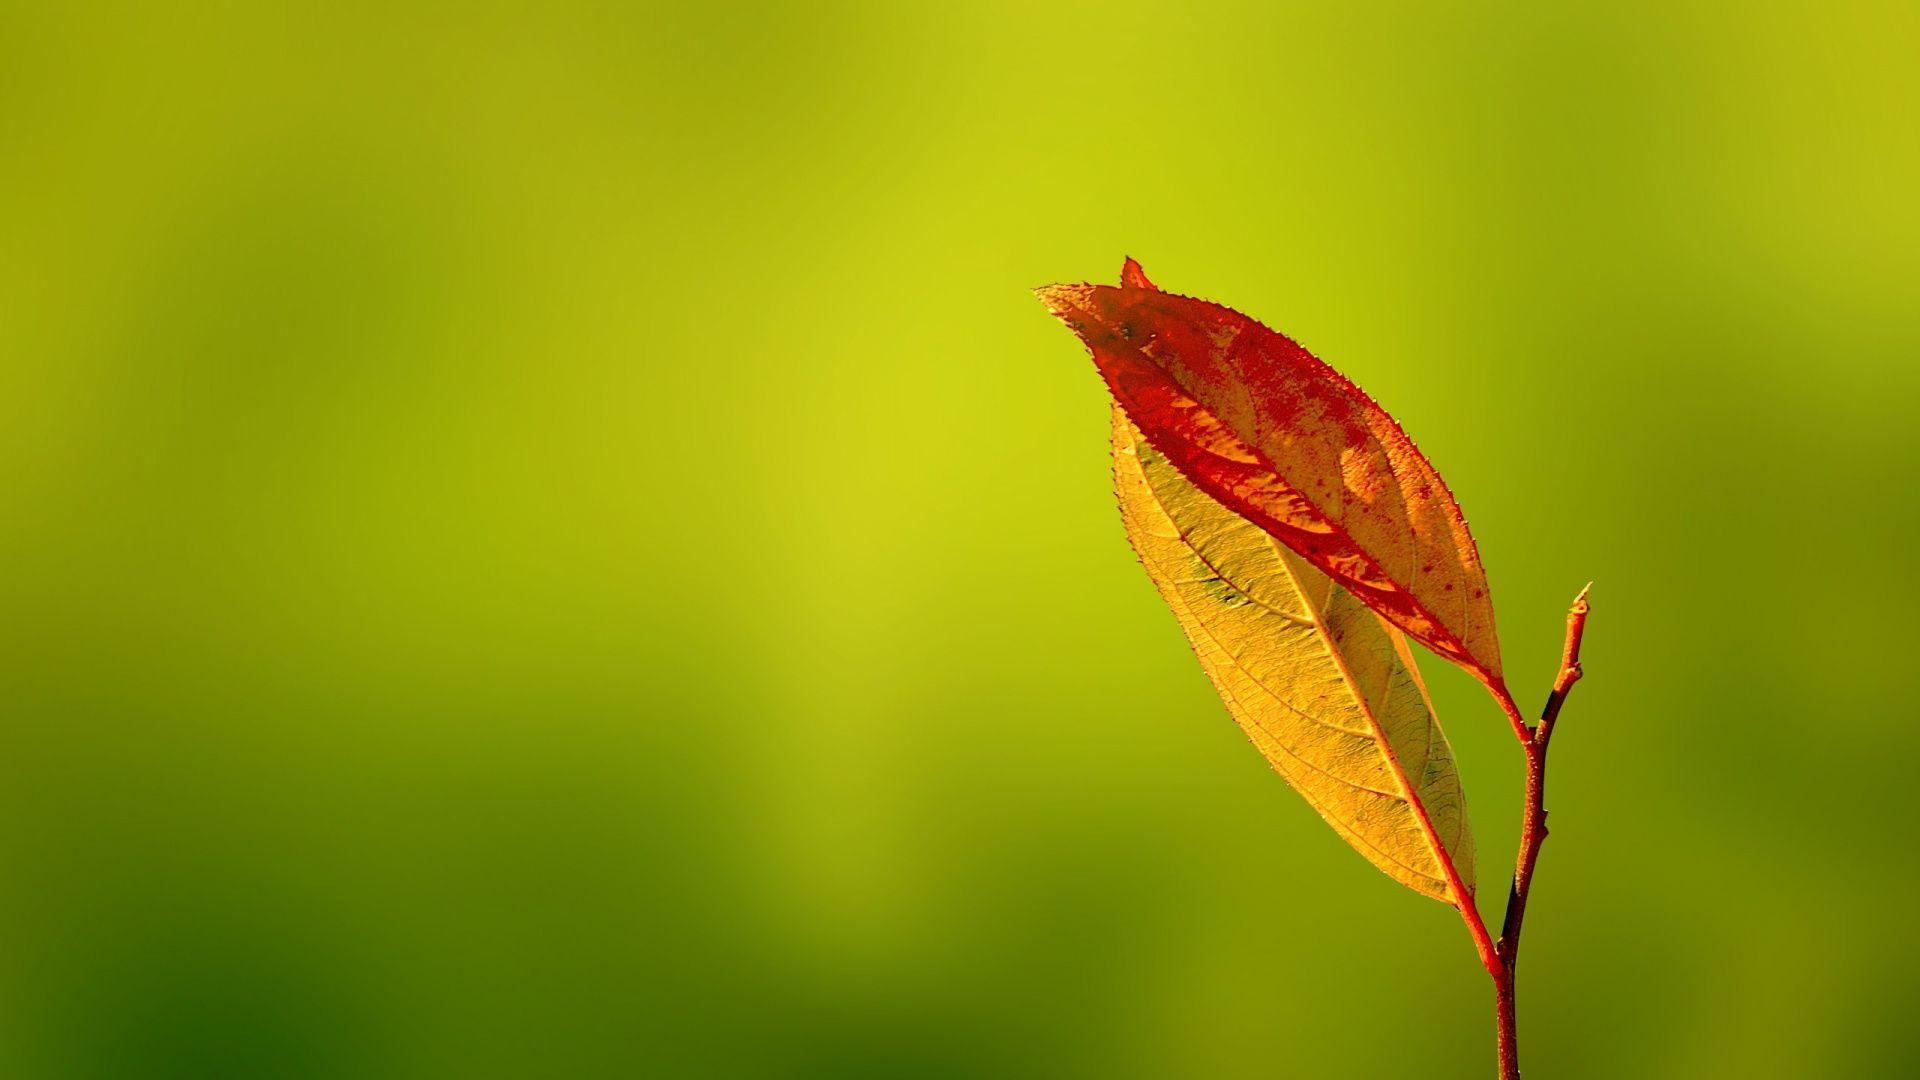 Download Leaves Wallpaper 13093 1920x1080 px High Resolution